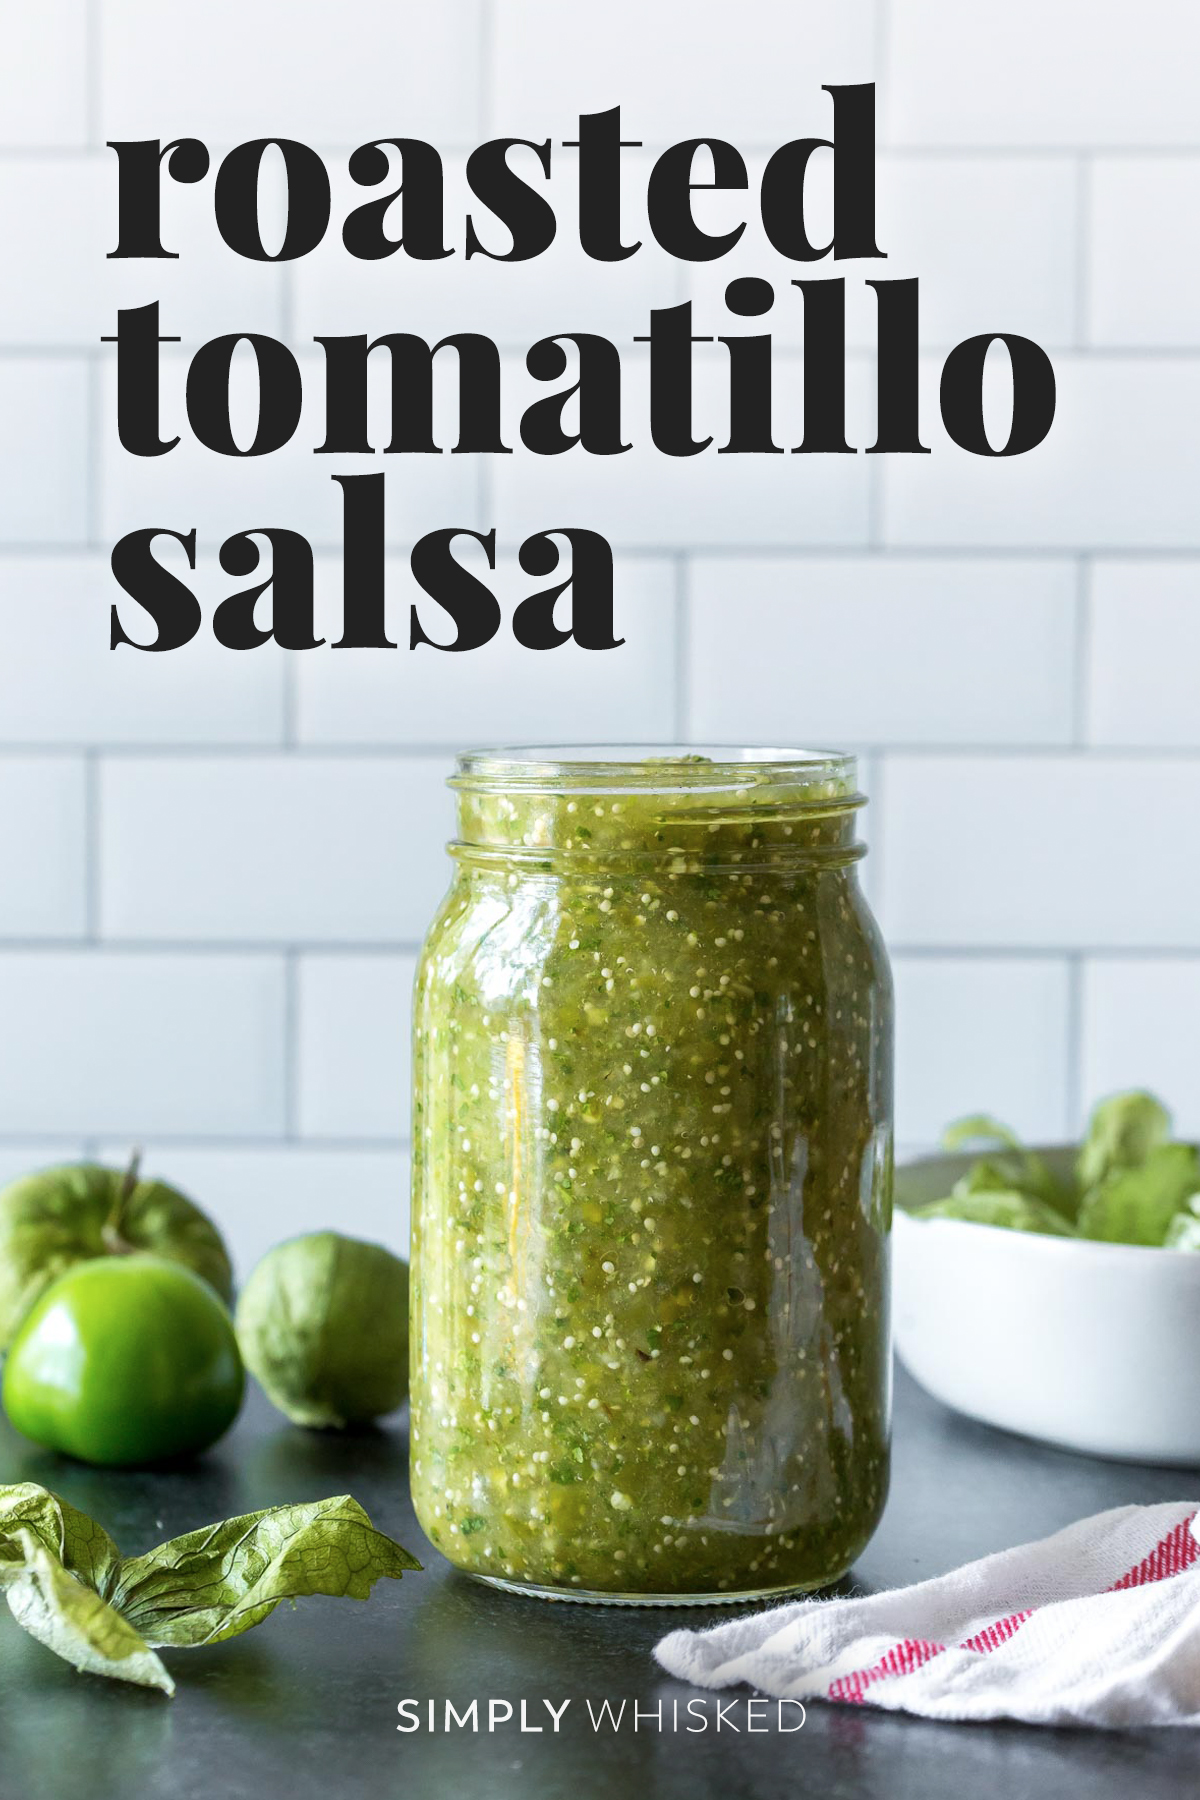 roasted tomatillo salsa recipe in a mason jar with a tile background - optimized for Pinterest with text overlay